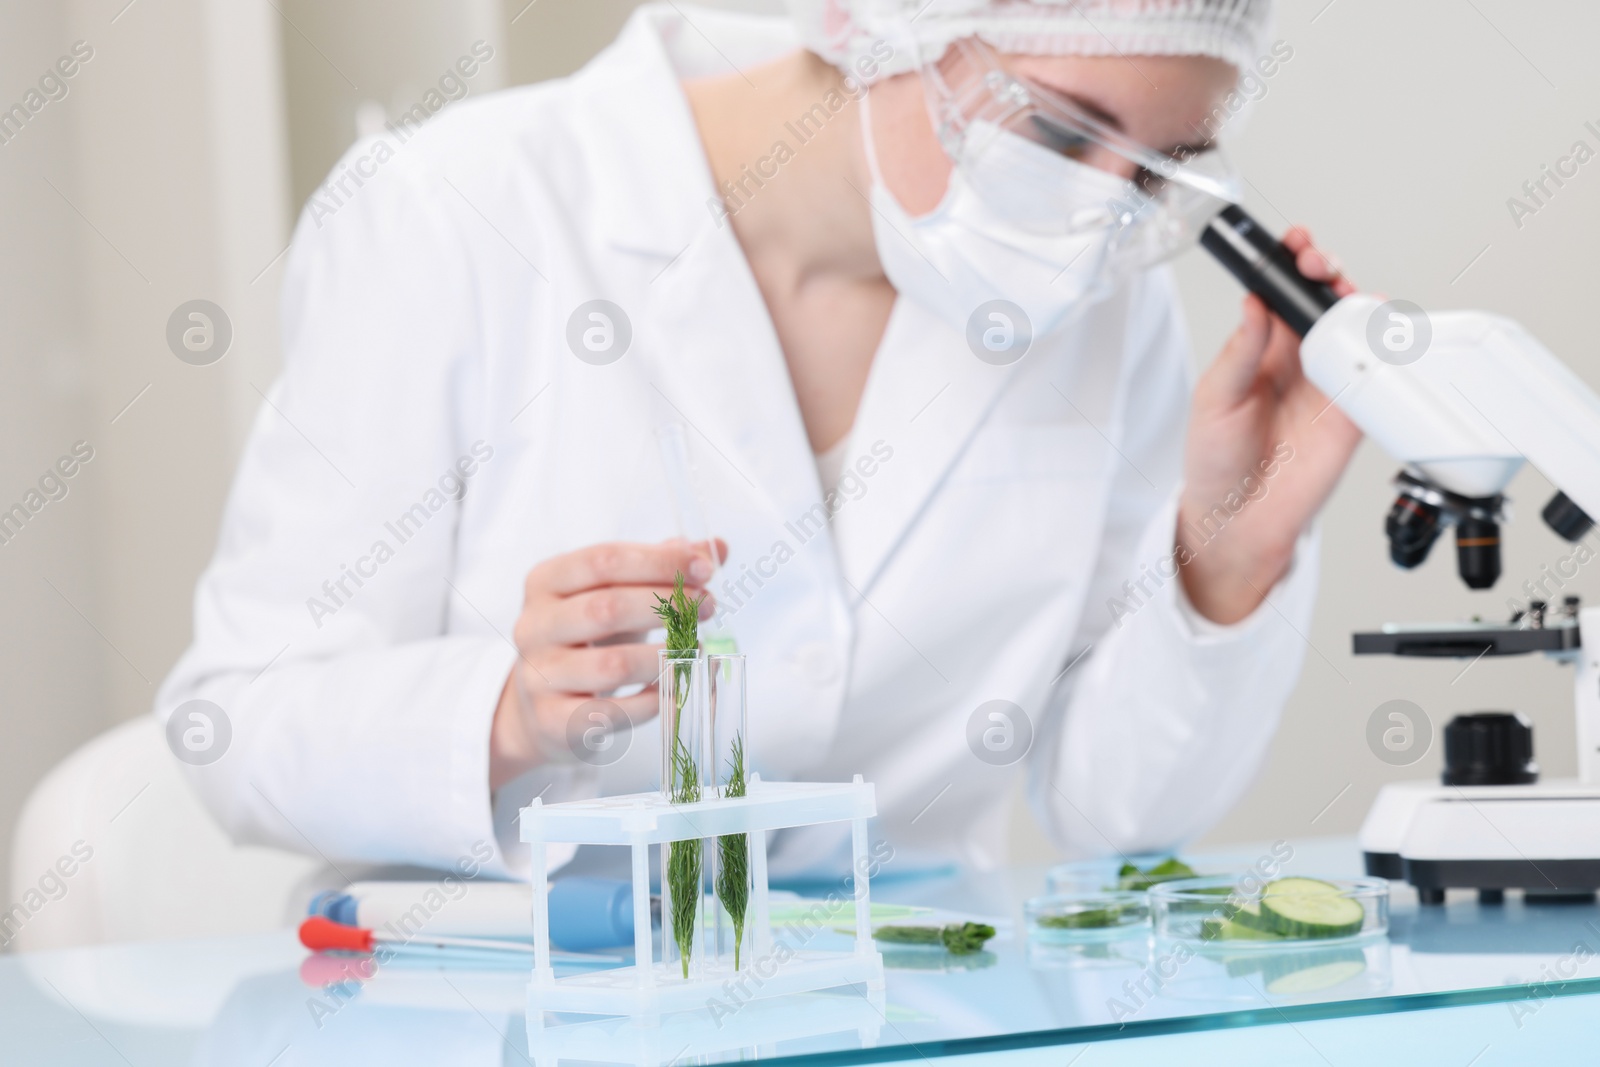 Photo of Quality control. Food inspector checking safety of products in laboratory, focus on test tubes with dill